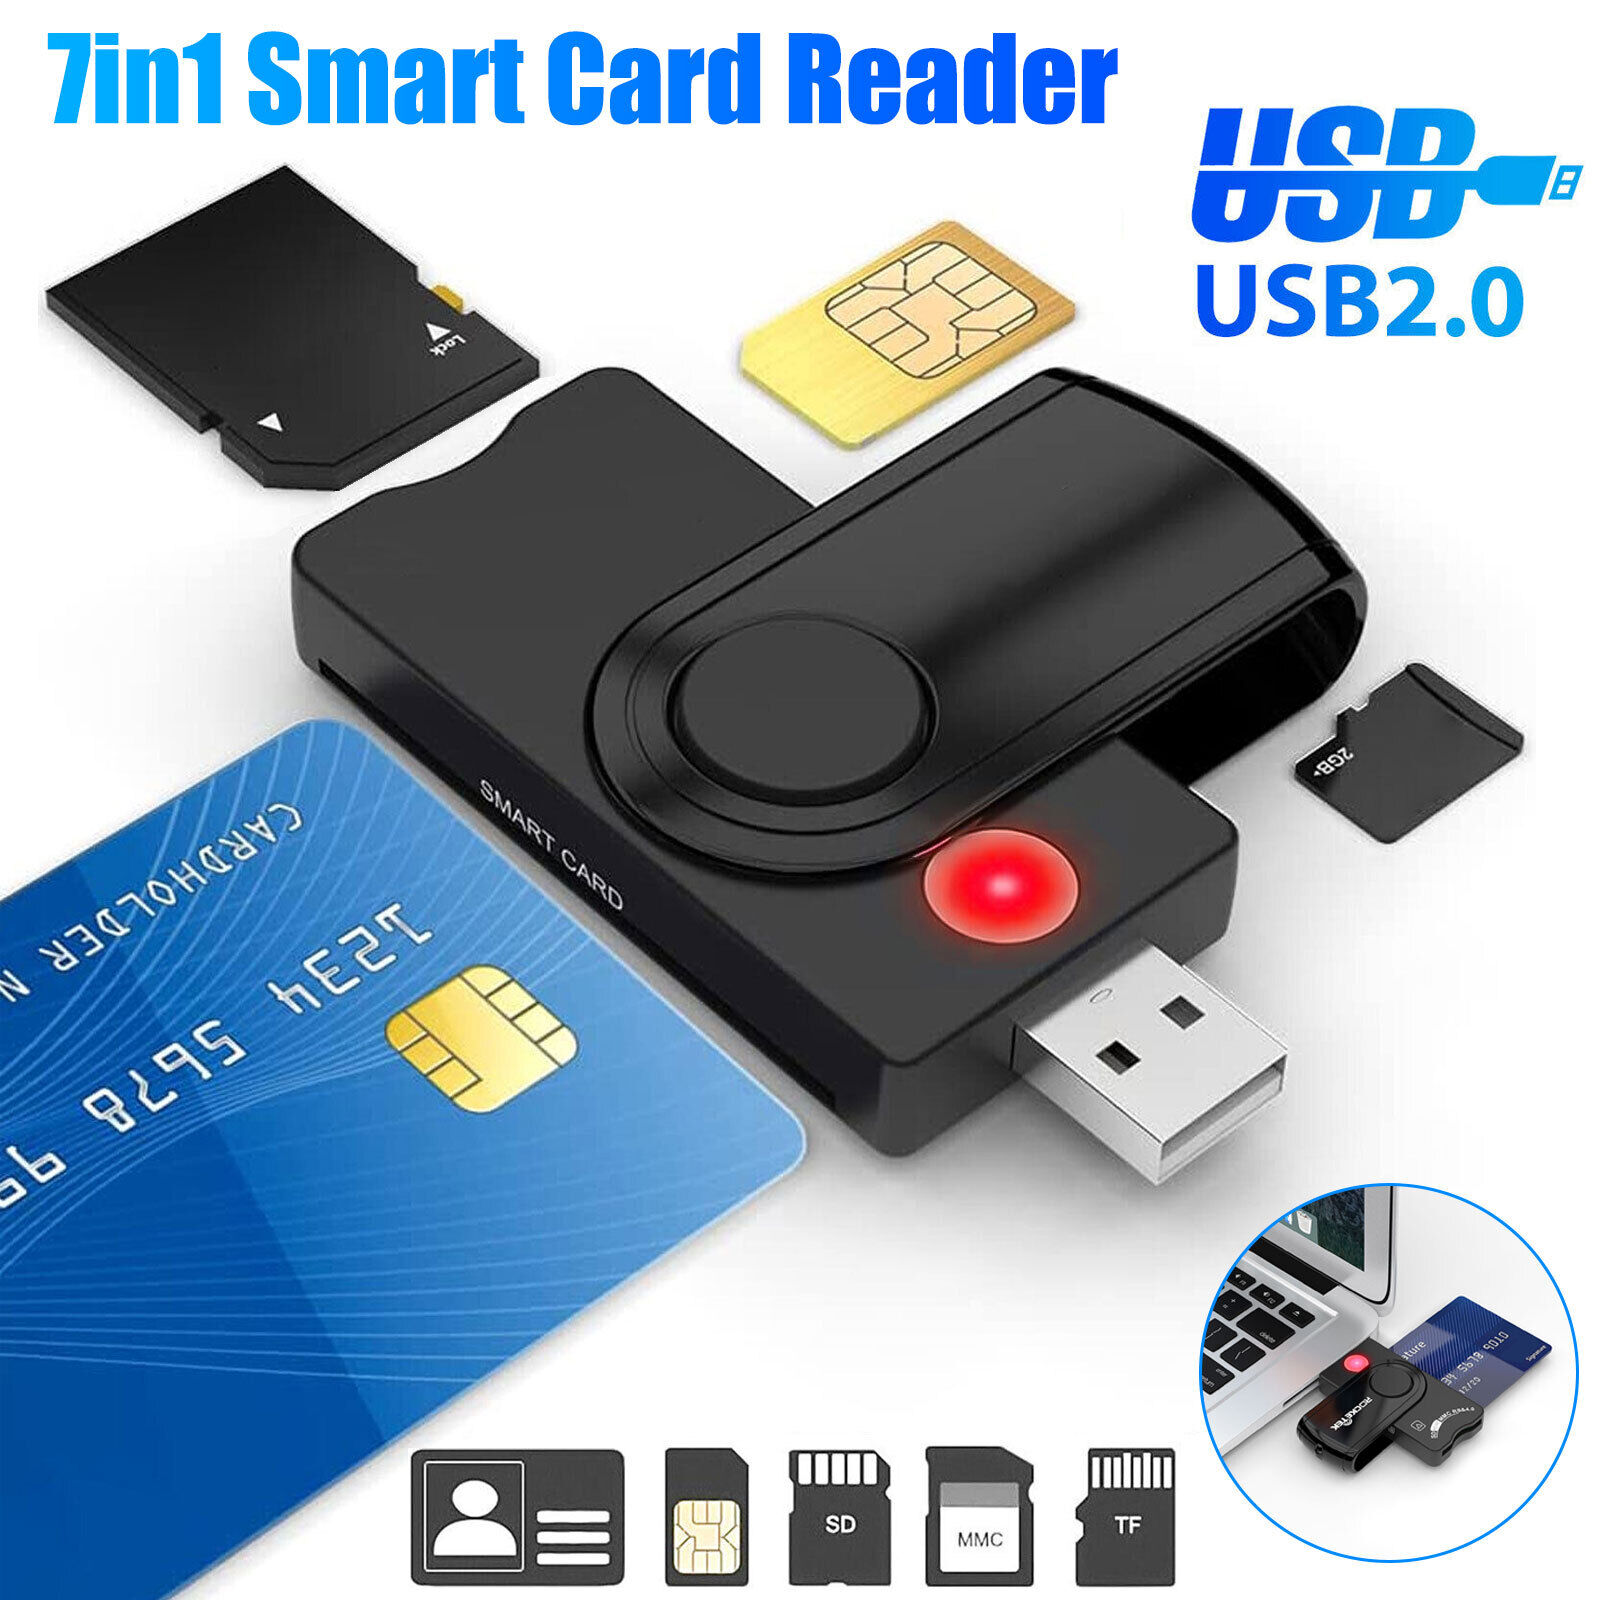 7-in-1 Smart USB 2.0 Micro TF SD SIM ID Card Reader Memory Adapter for PC Laptop